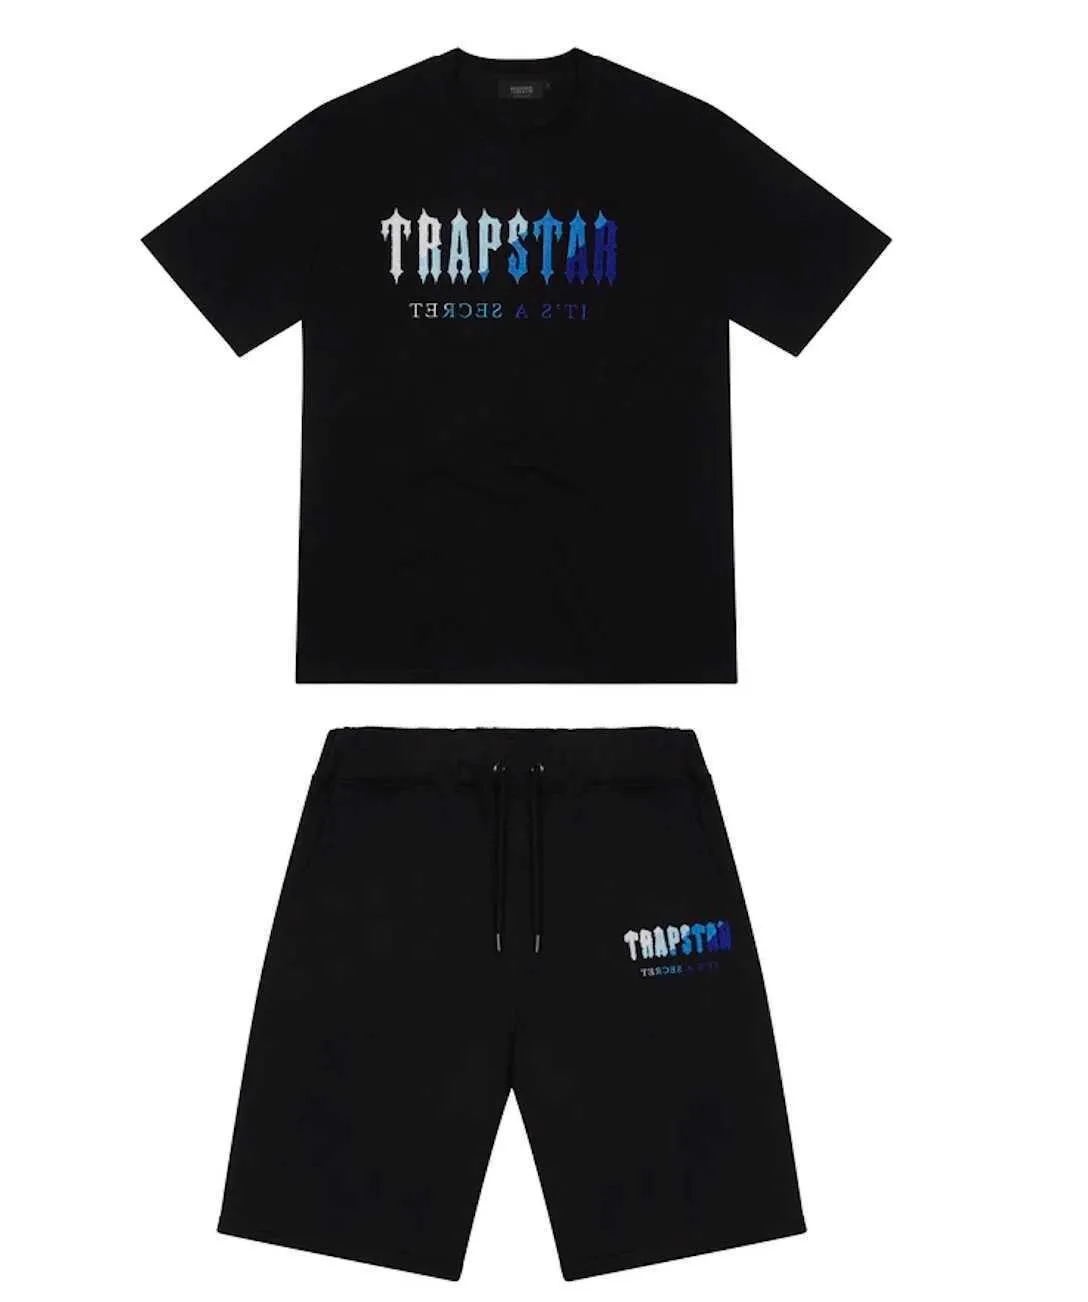 Trapstar London t shirt Chest Blue White Color Towel Embroidery mens Shirt and shorts High Quality casual Street shirts British Fashion